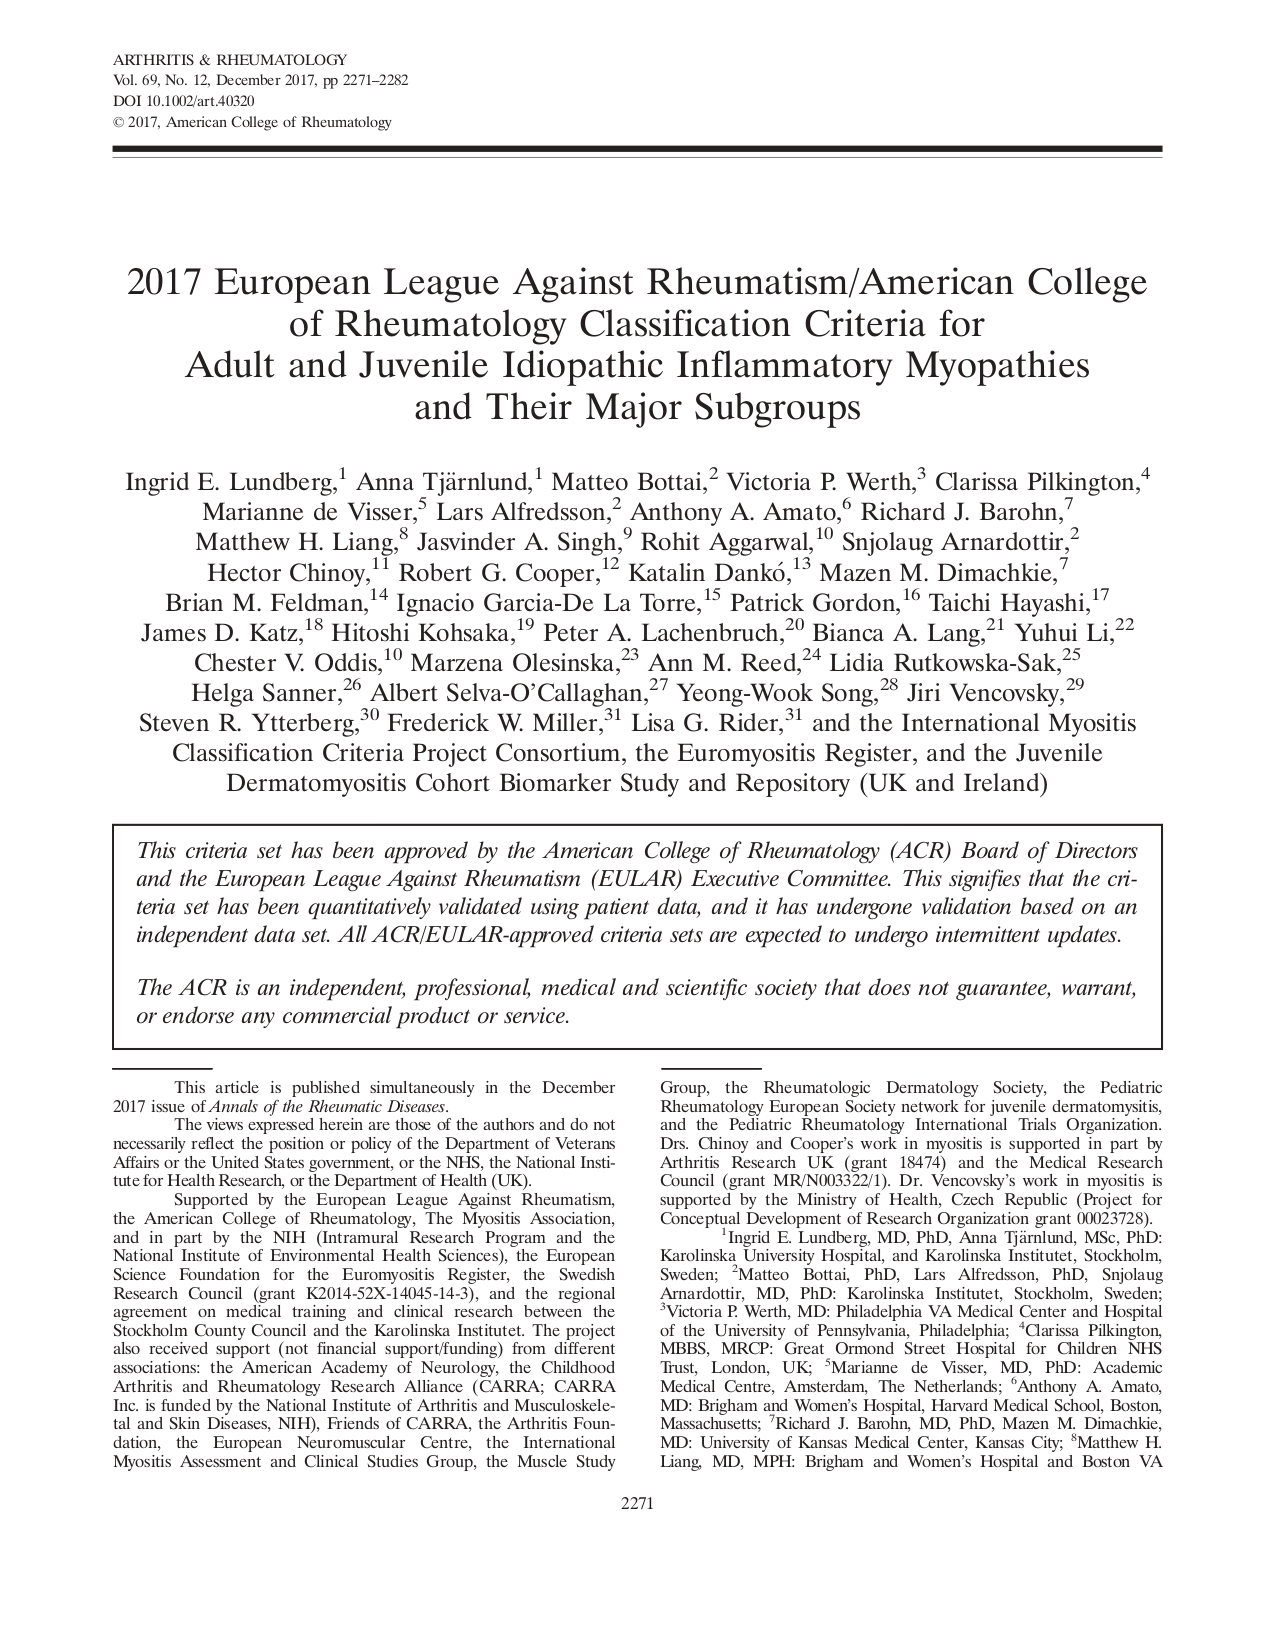 2017 European League Against Rheumatism/American College of Rheumatology classification criteria for adult and juvenile idiopathic inflammatory myopathies and their major subgroups